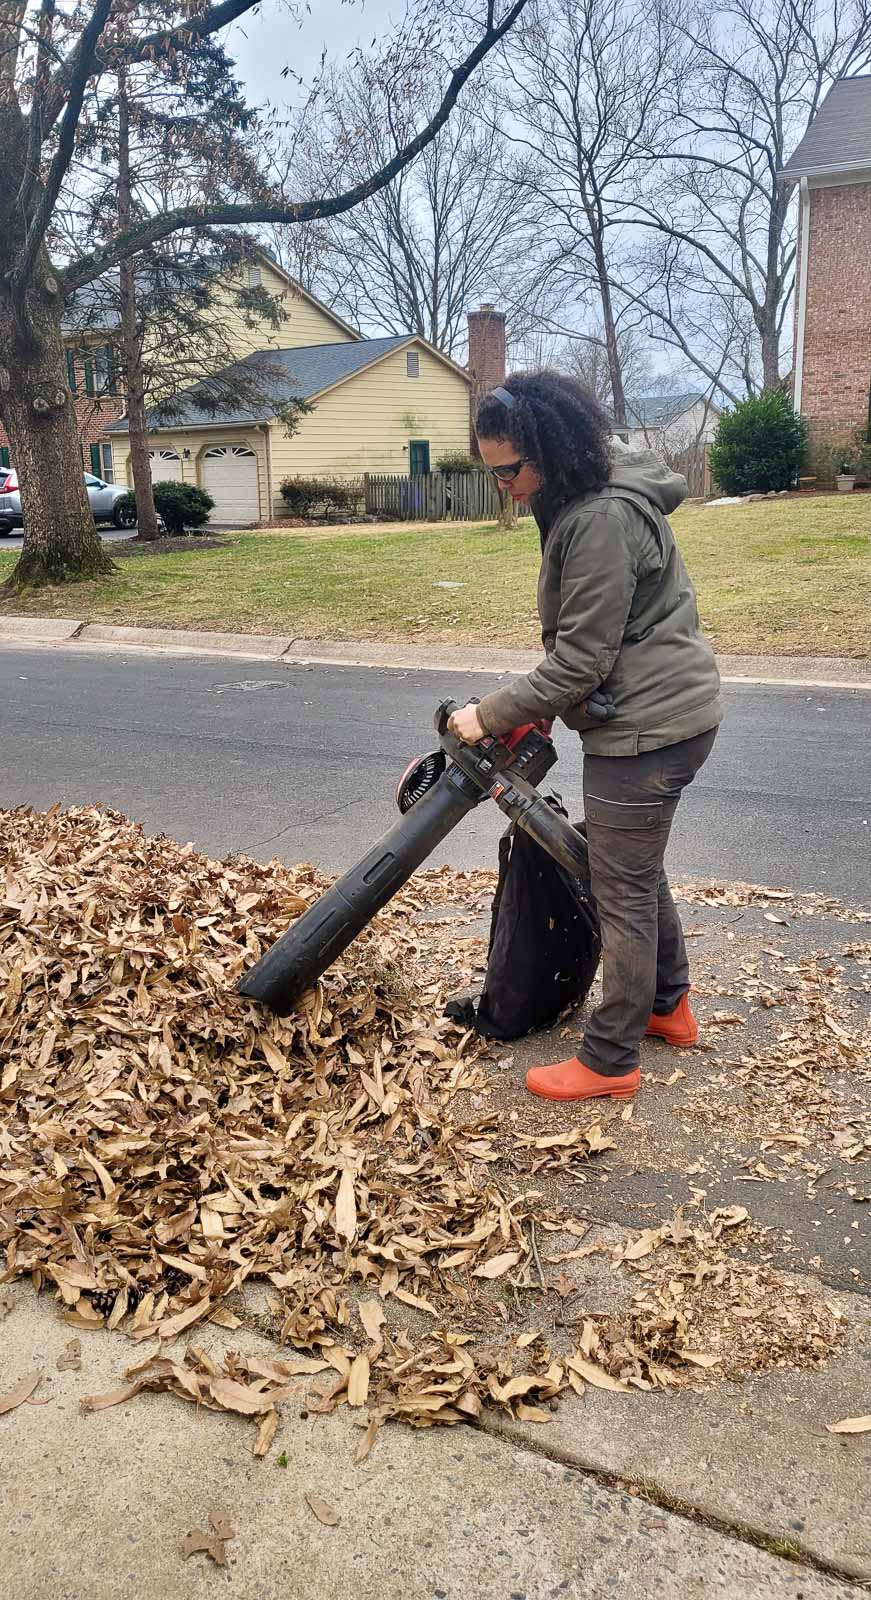 Leaf blower vacuums can blow leaves into a pile, then suck them up to mulch them.